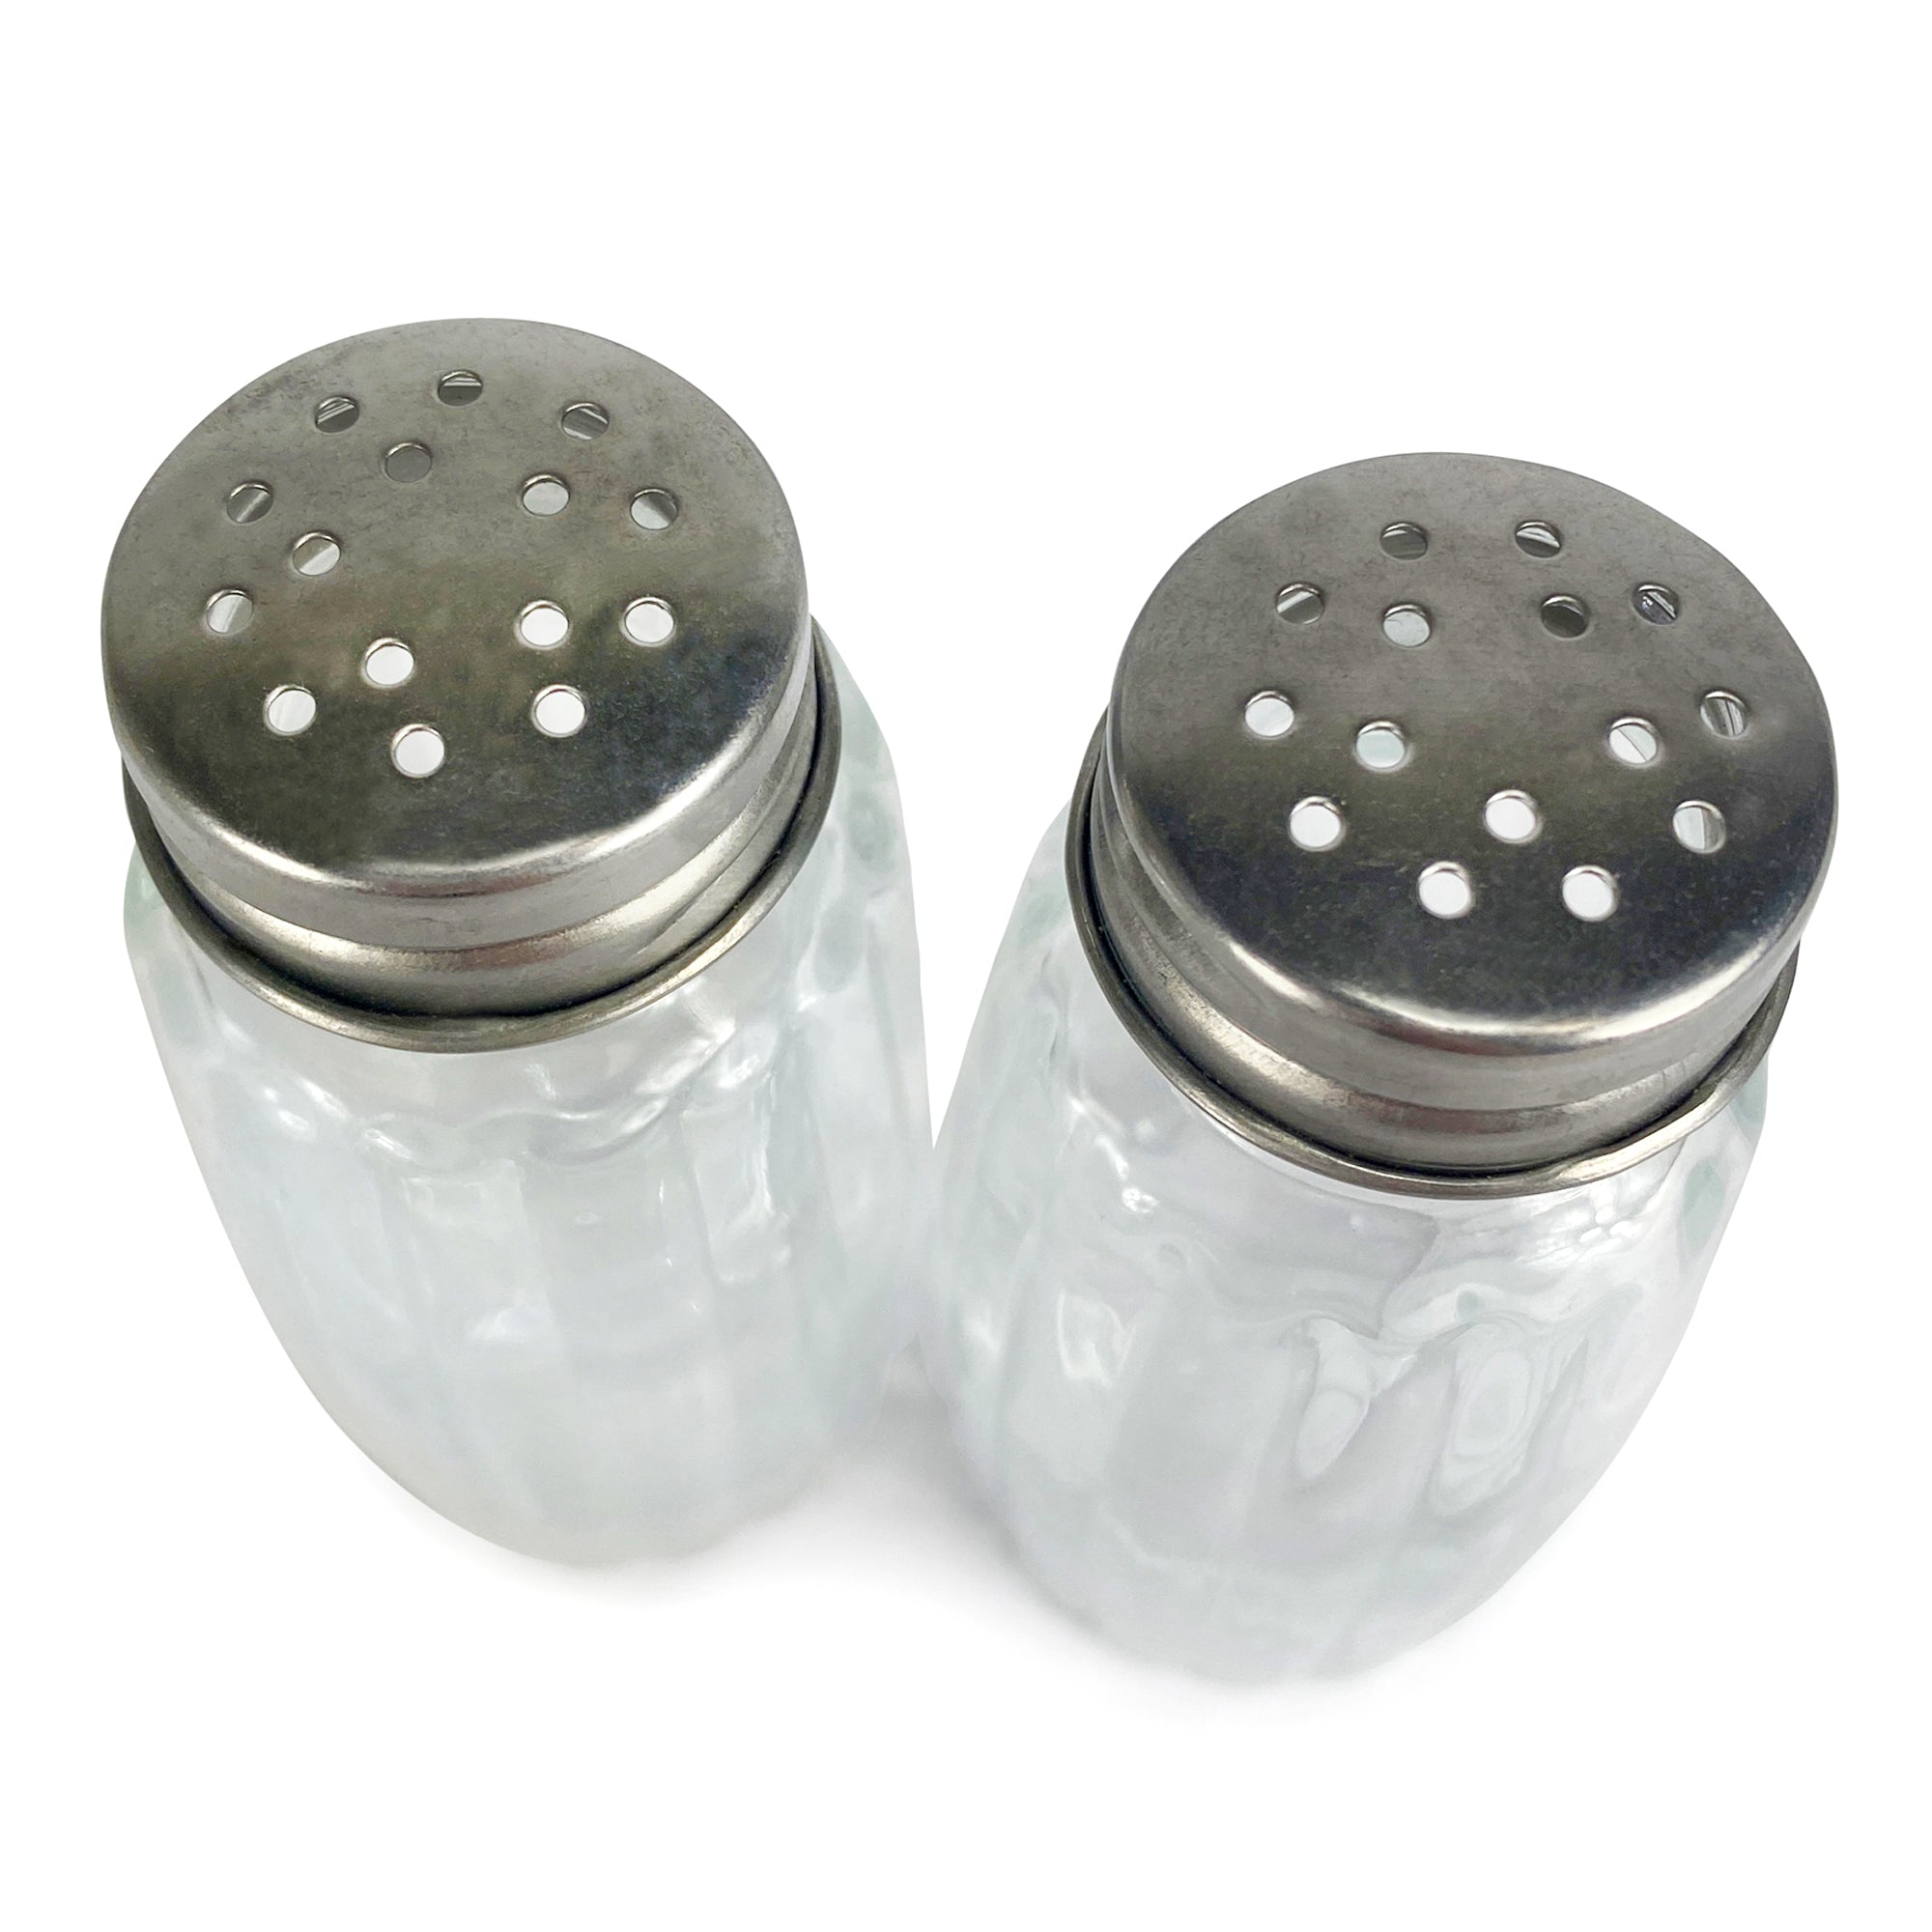 Attractives Magnetic Salt and Pepper Shakers - Motorcycle Side Car